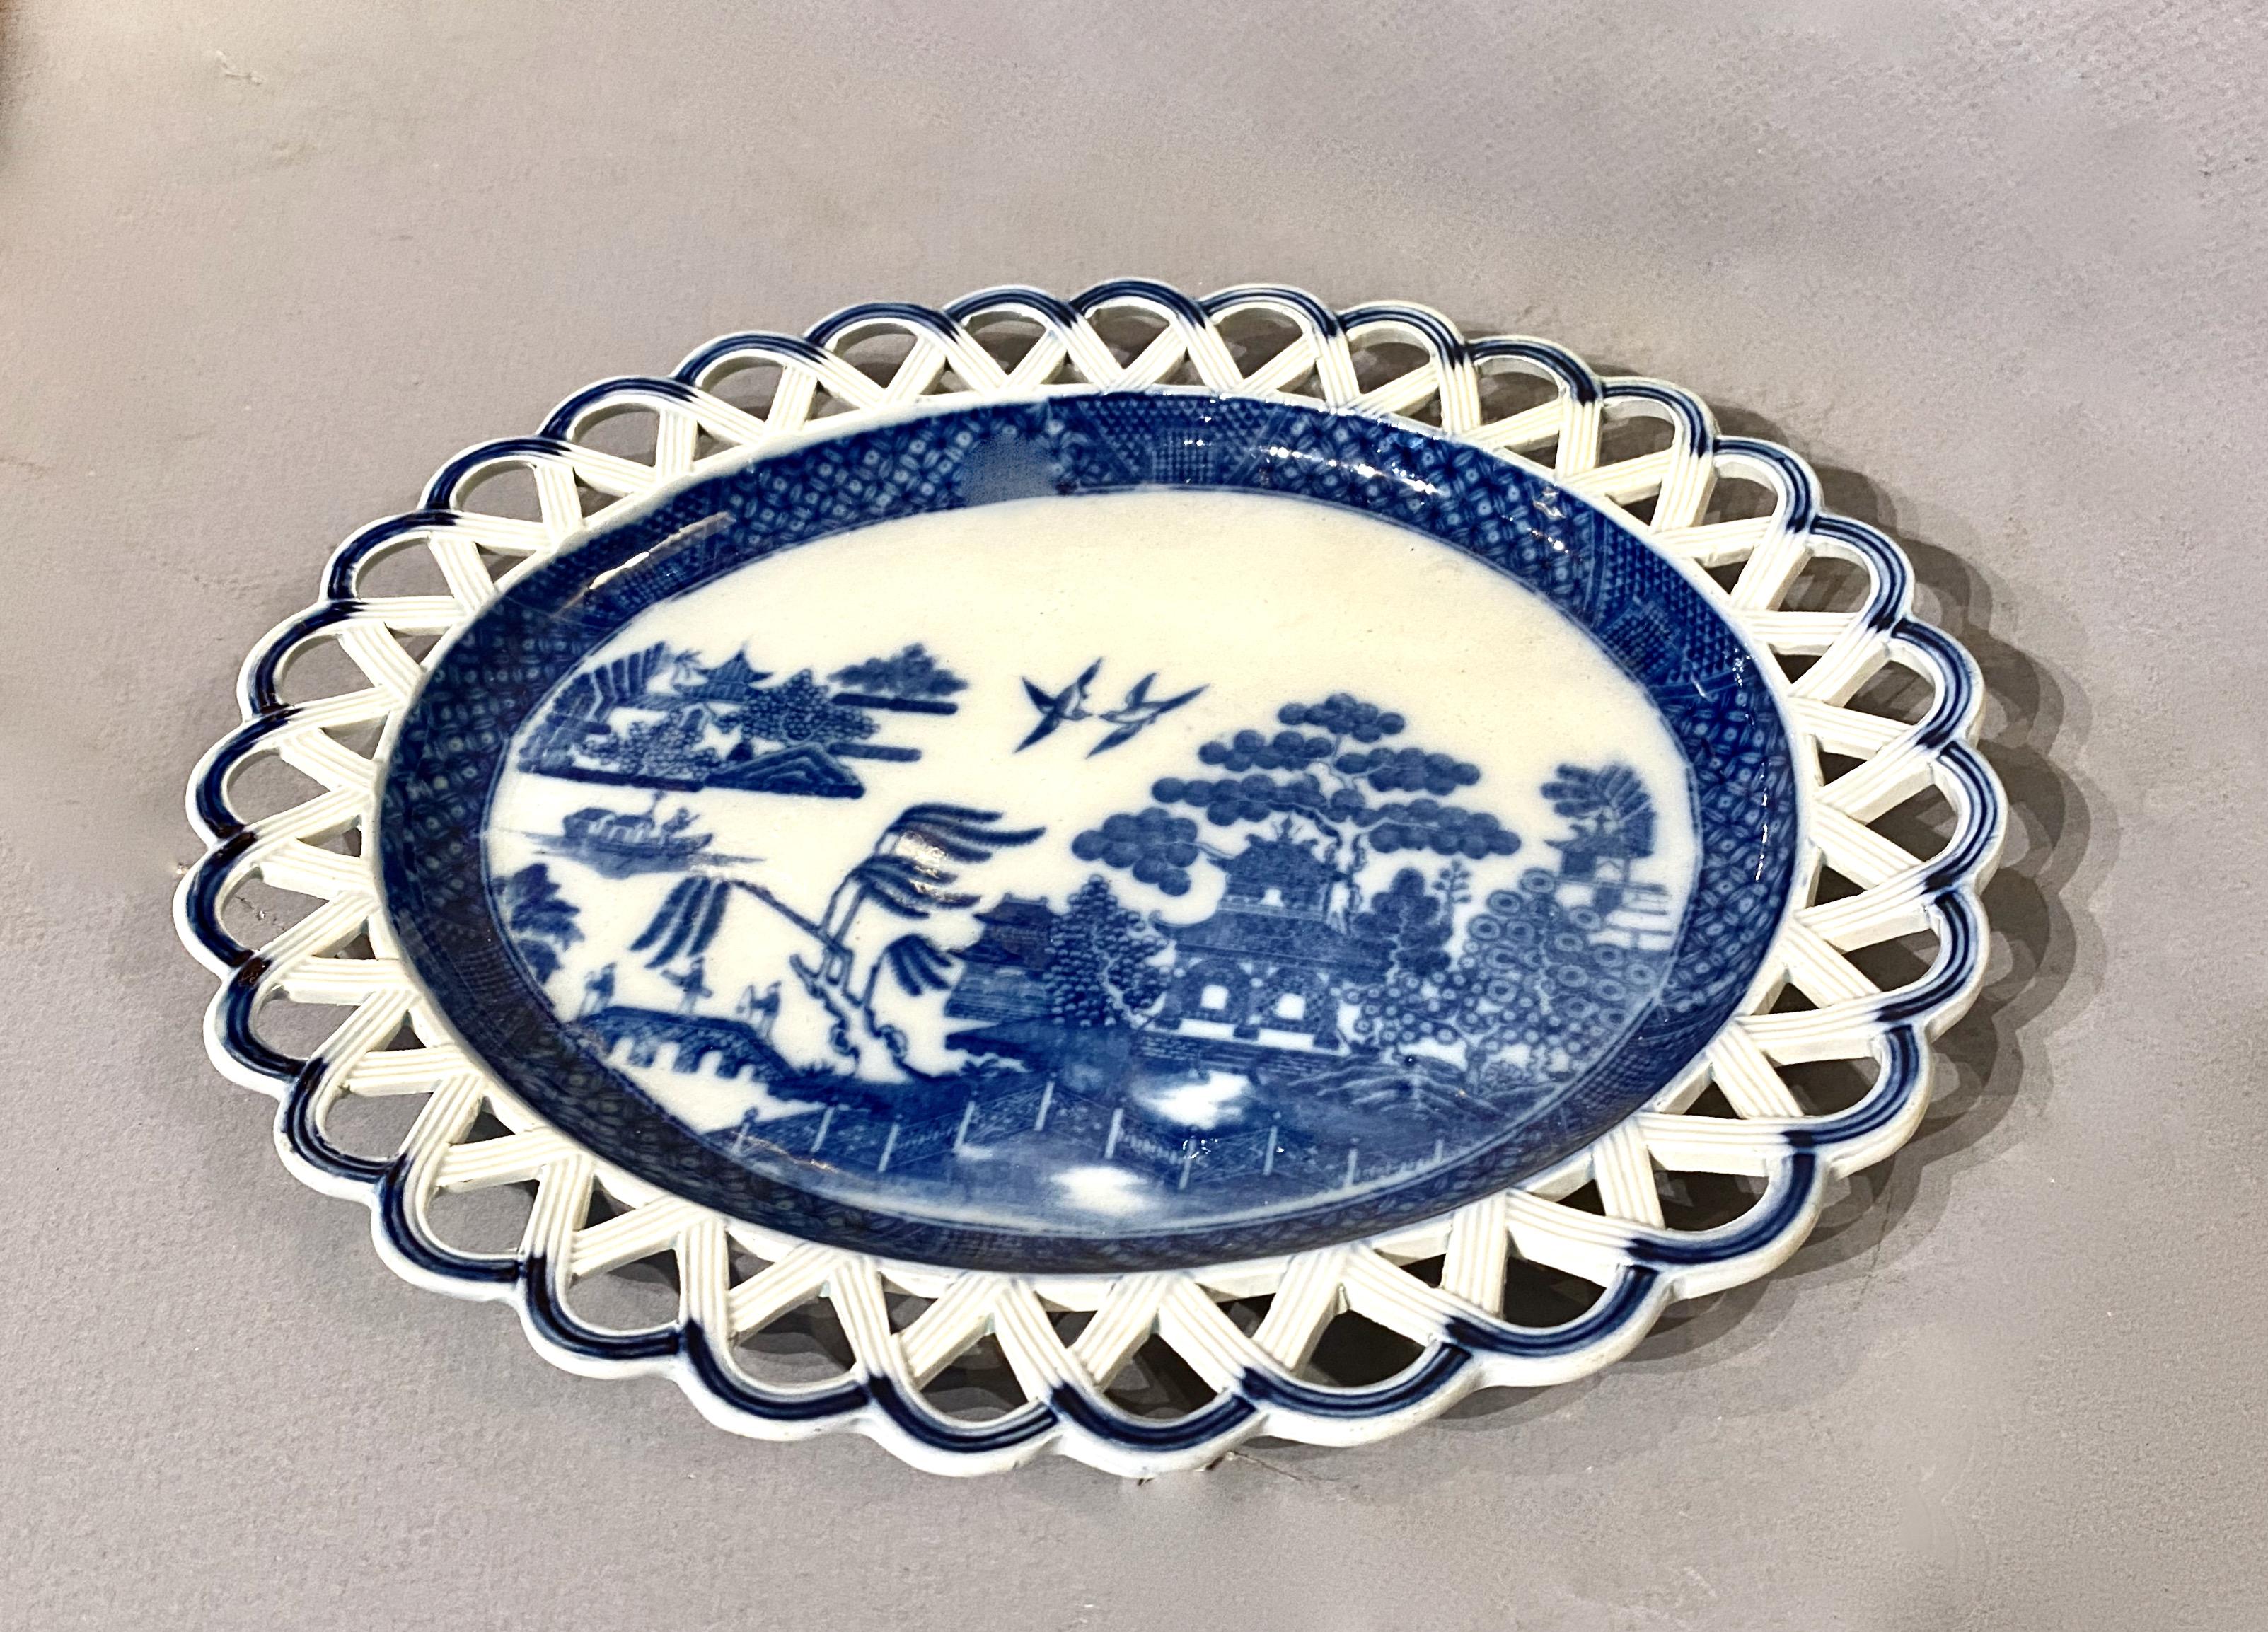 This is a good example of a late 18th c. or early 19th c. pearlware blue and white small serving platter or underplate. The platter features a reticulated border with a blue and white transfer border encircling a 